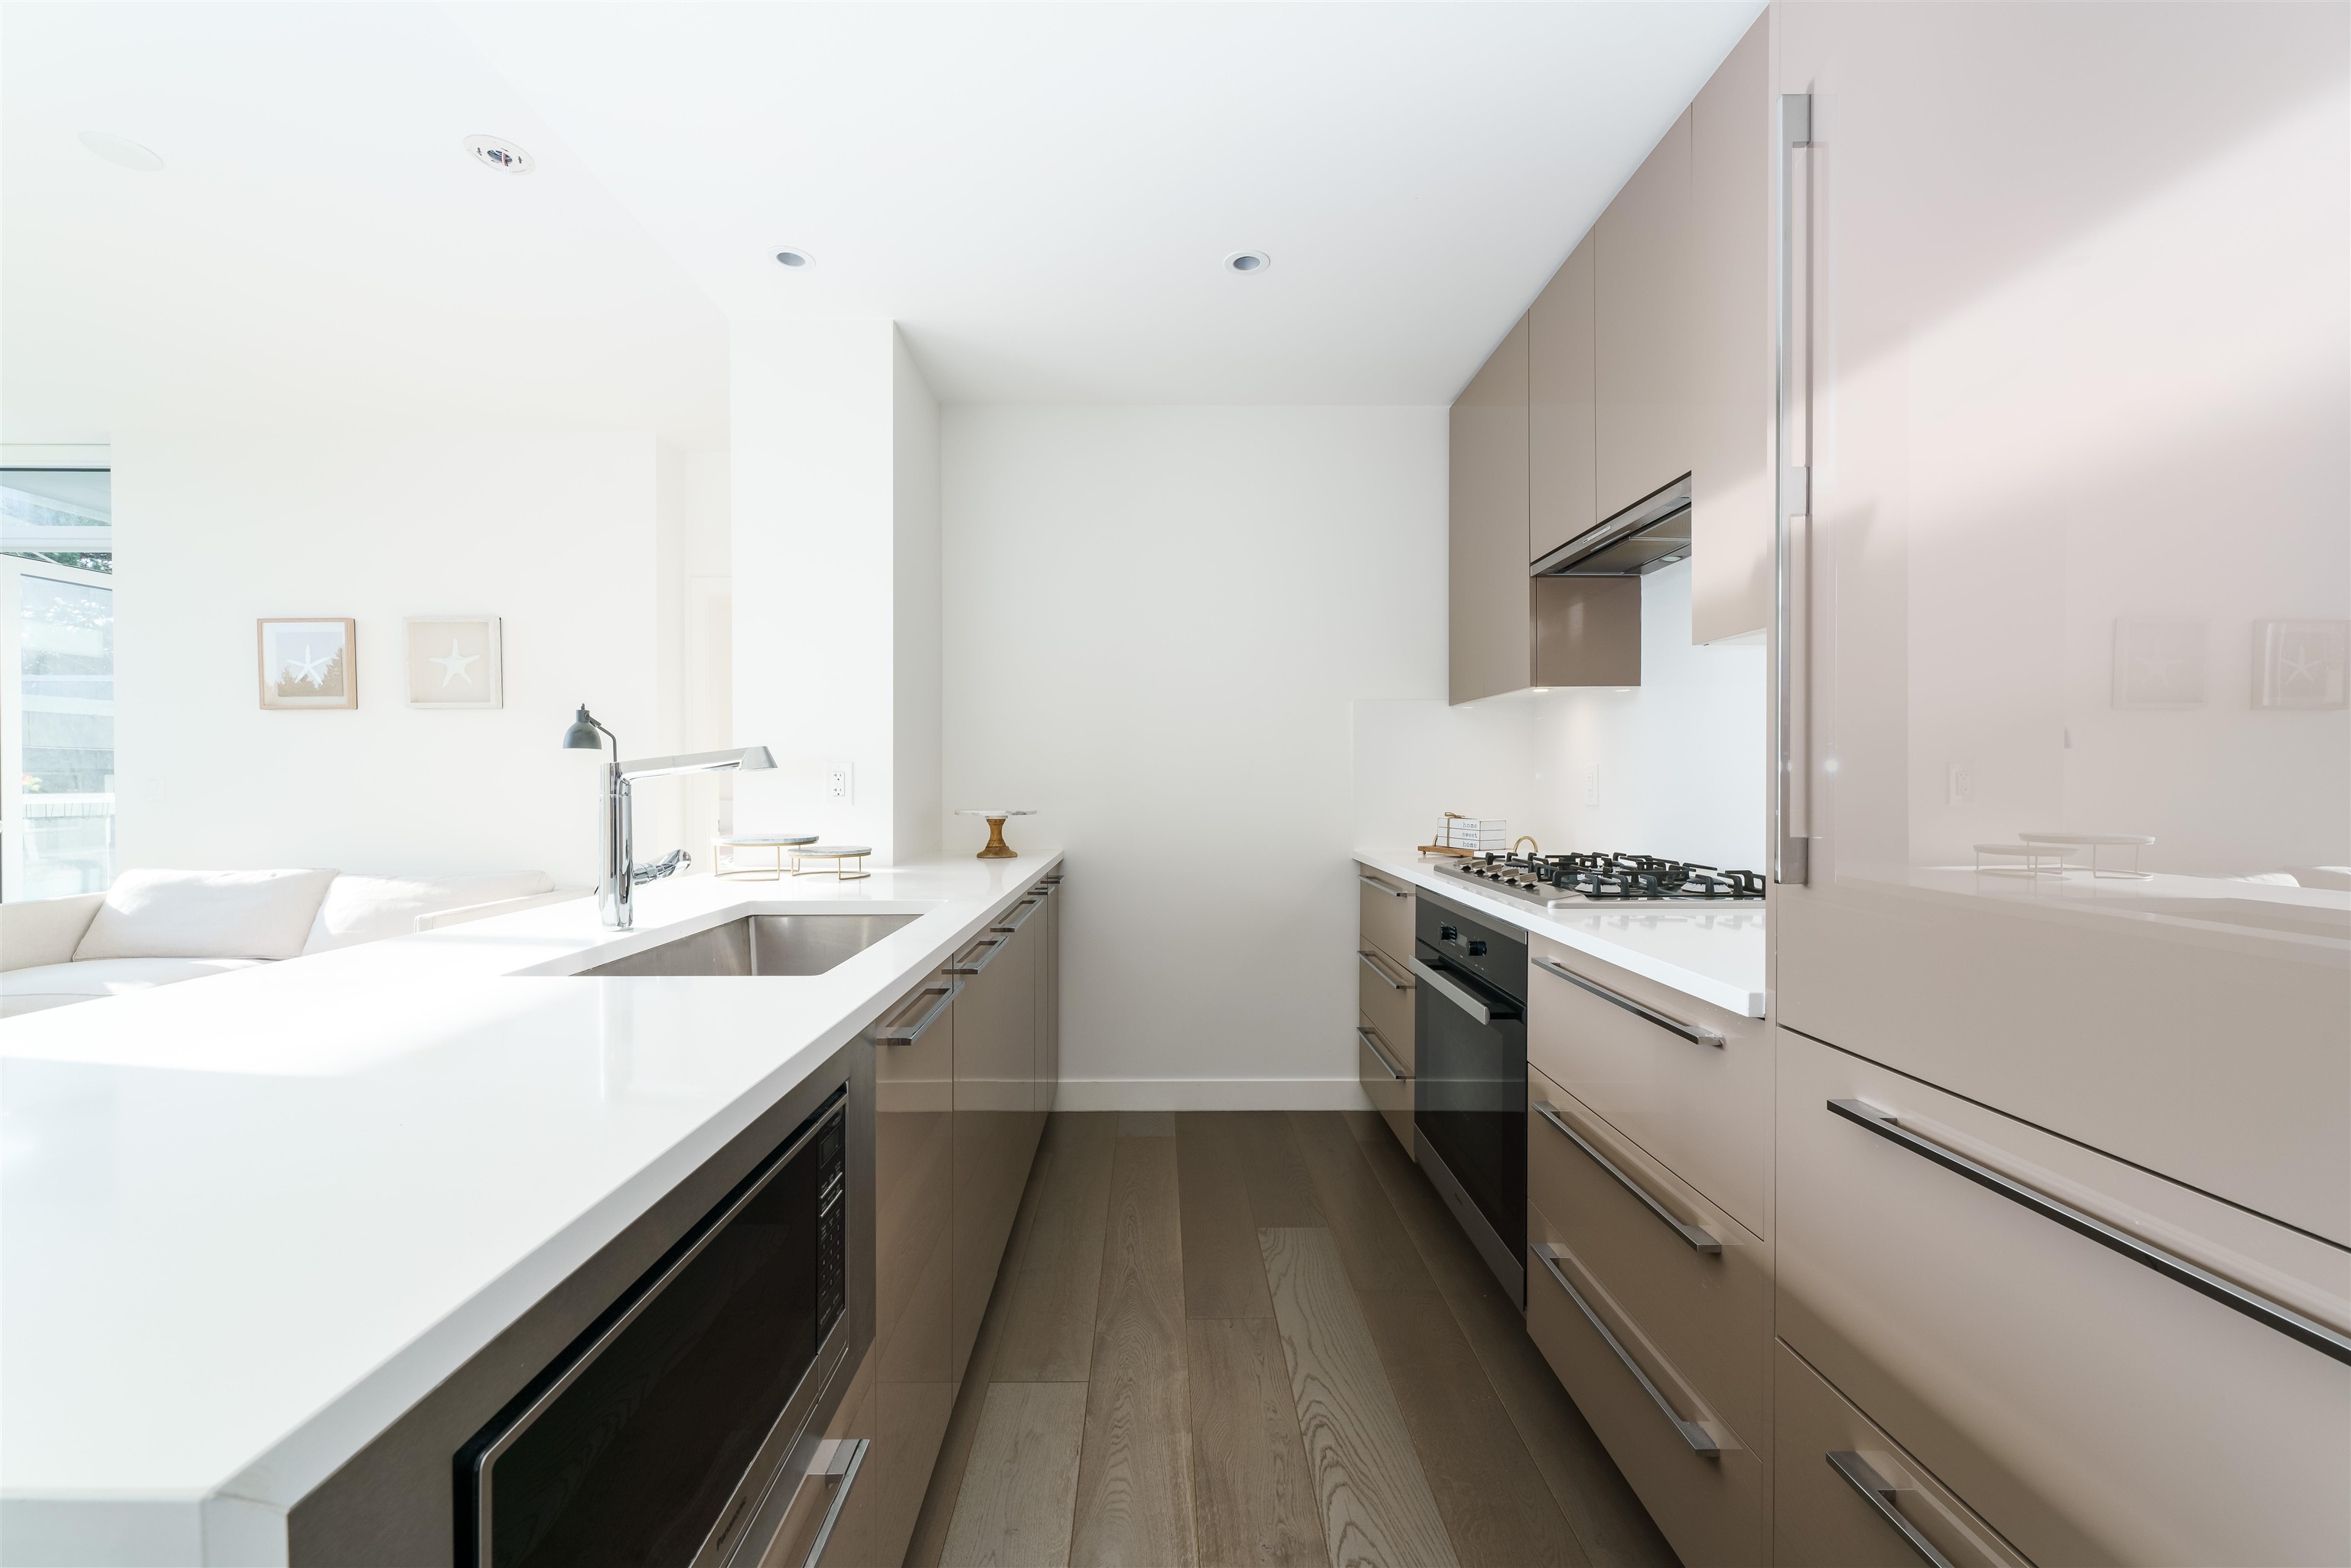 Listing image of 212 5189 CAMBIE STREET